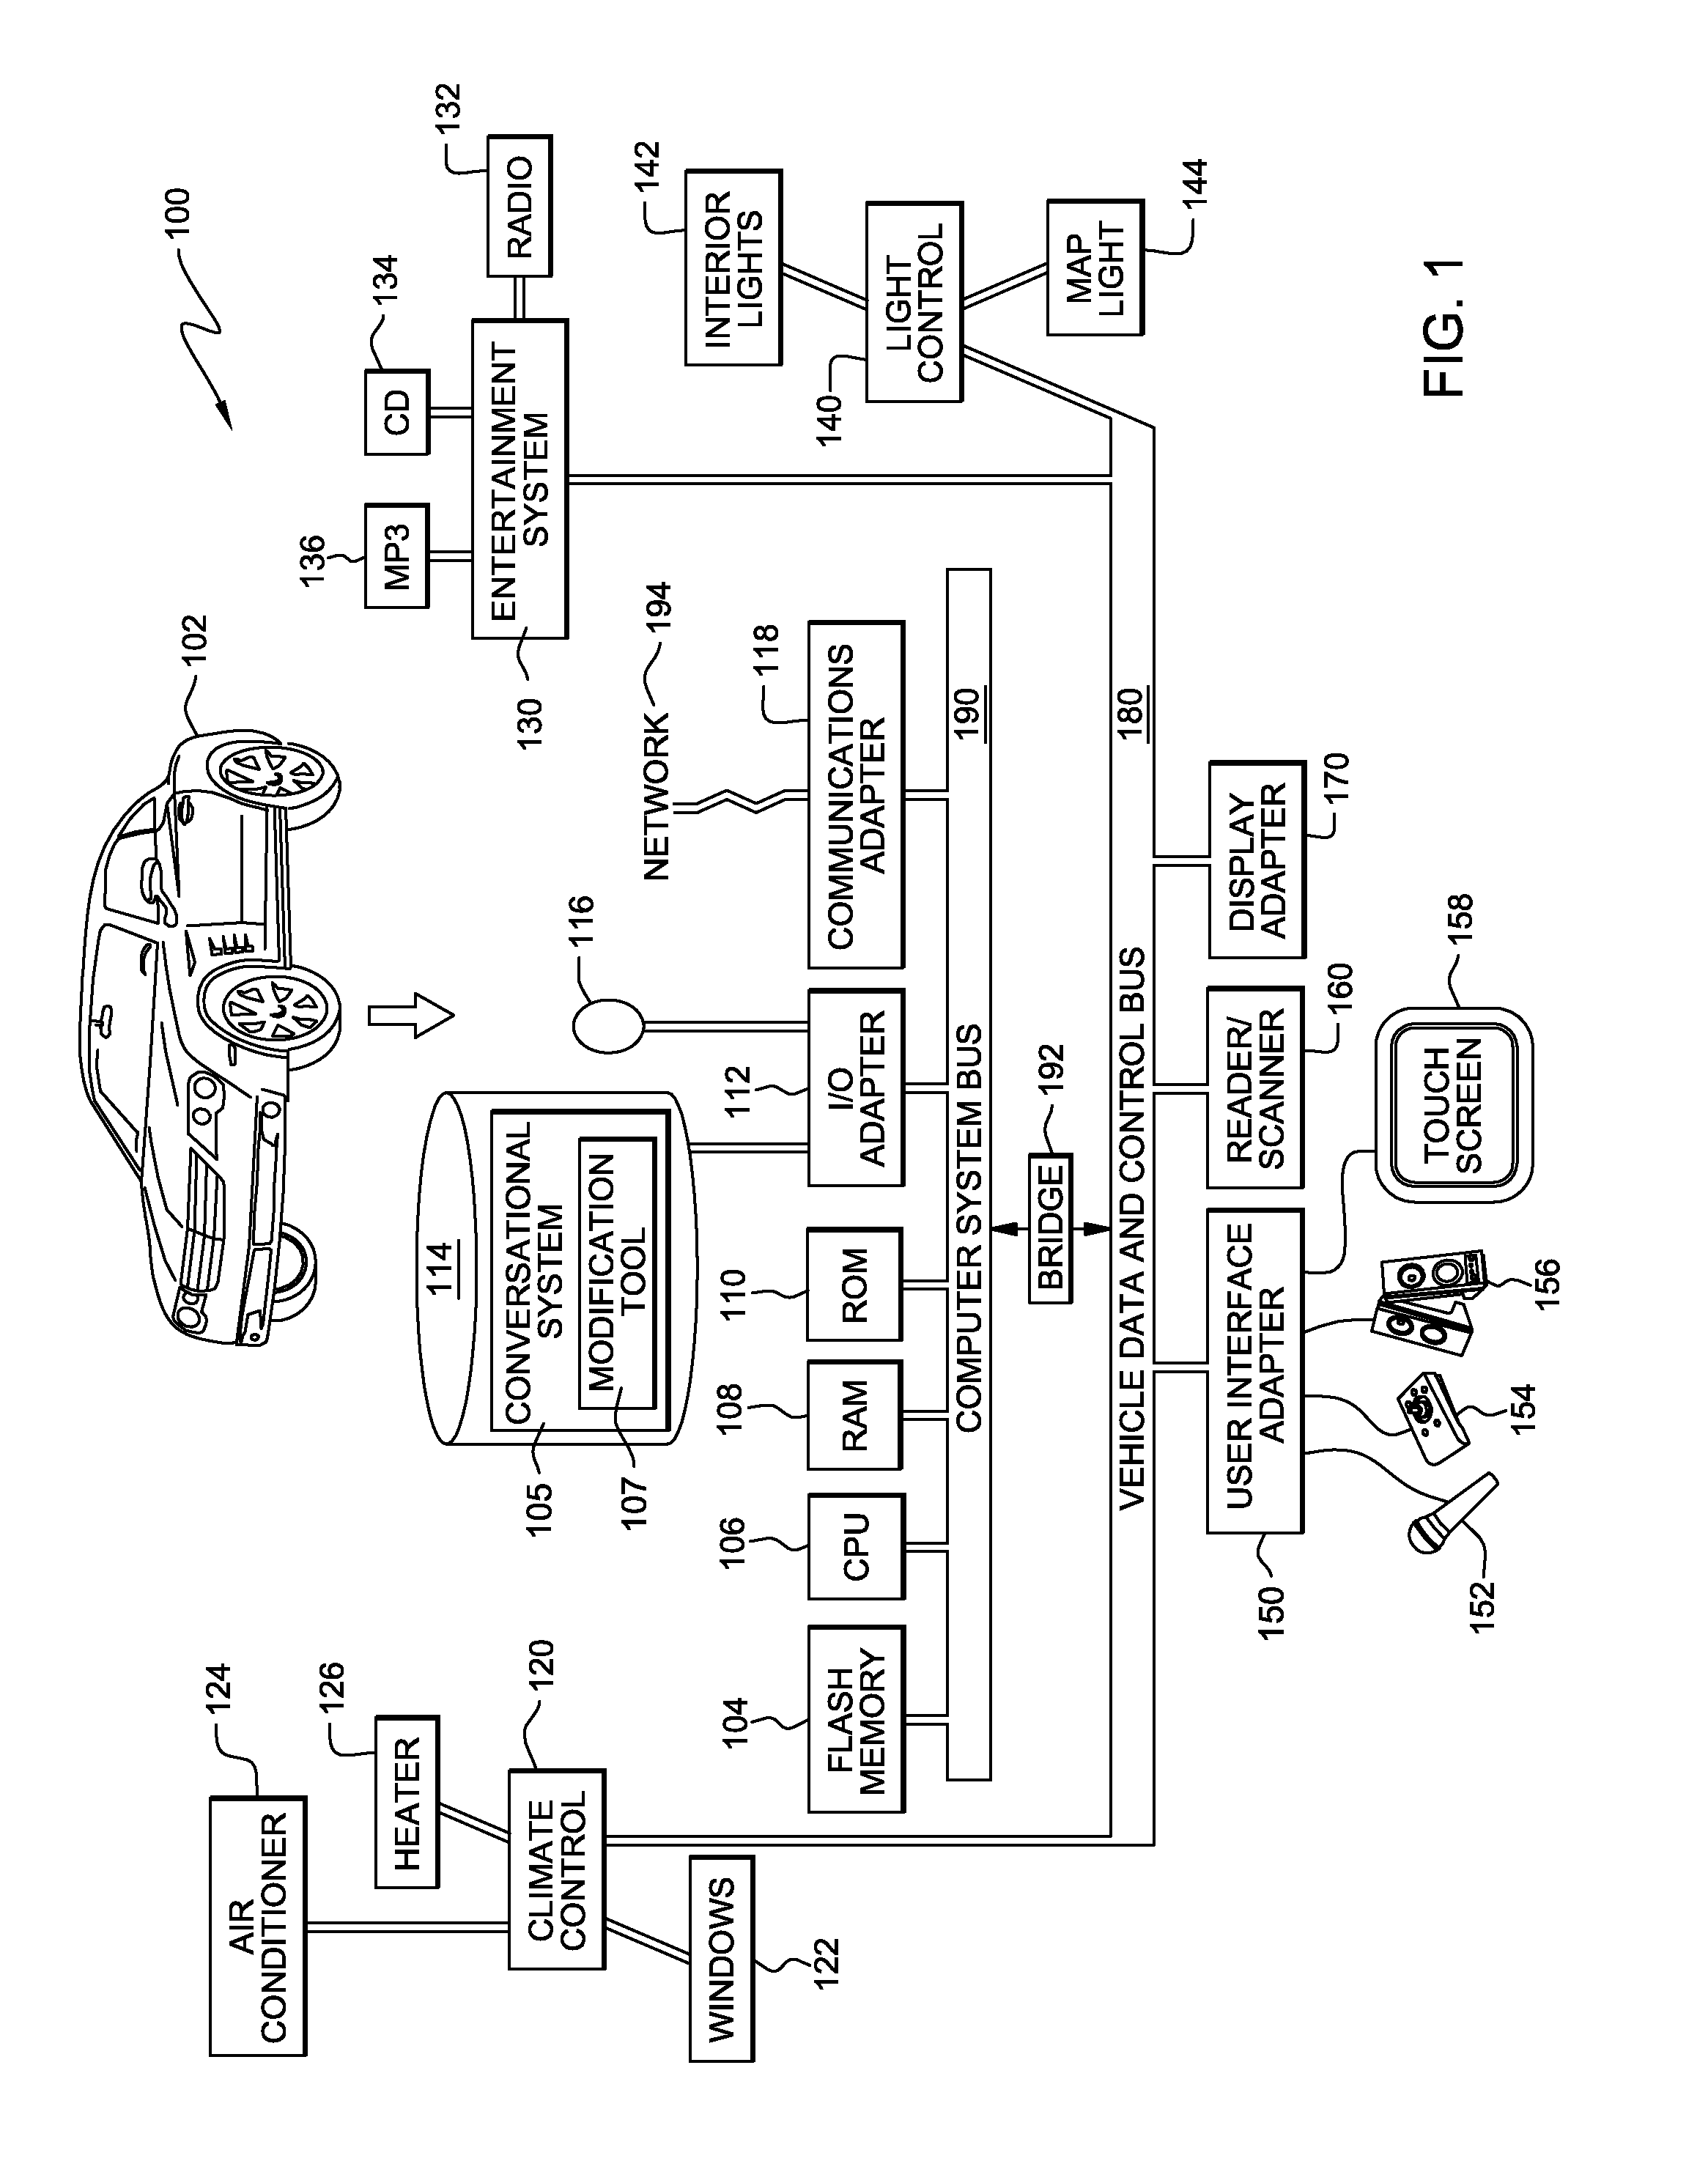 Machine, system and method for user-guided teaching and modifying of voice commands and actions executed by a conversational learning system